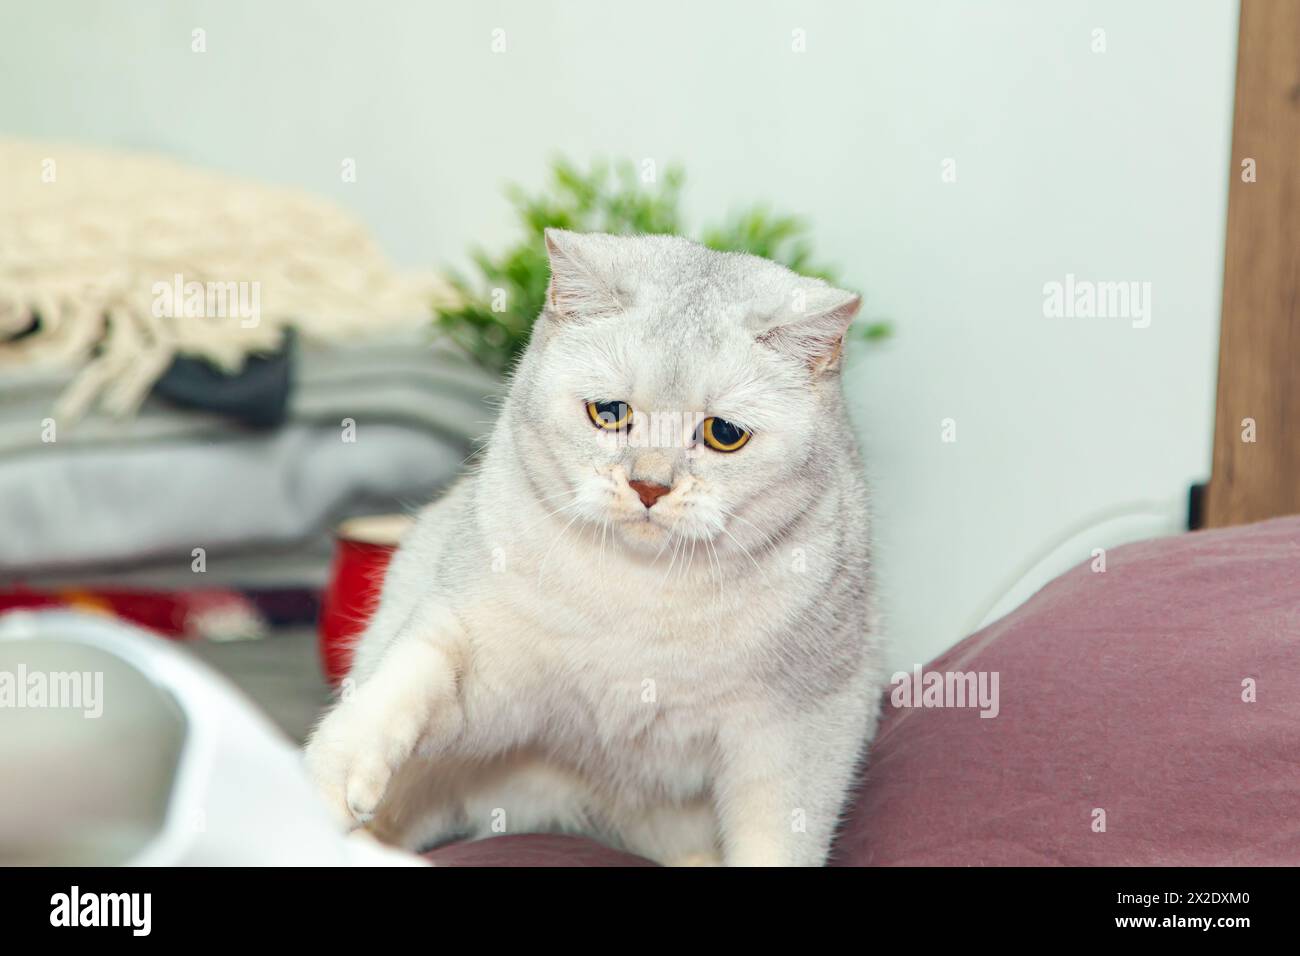 Silver British cat is angry. An aggressive cat growls and attacks the mop. Stock Photo